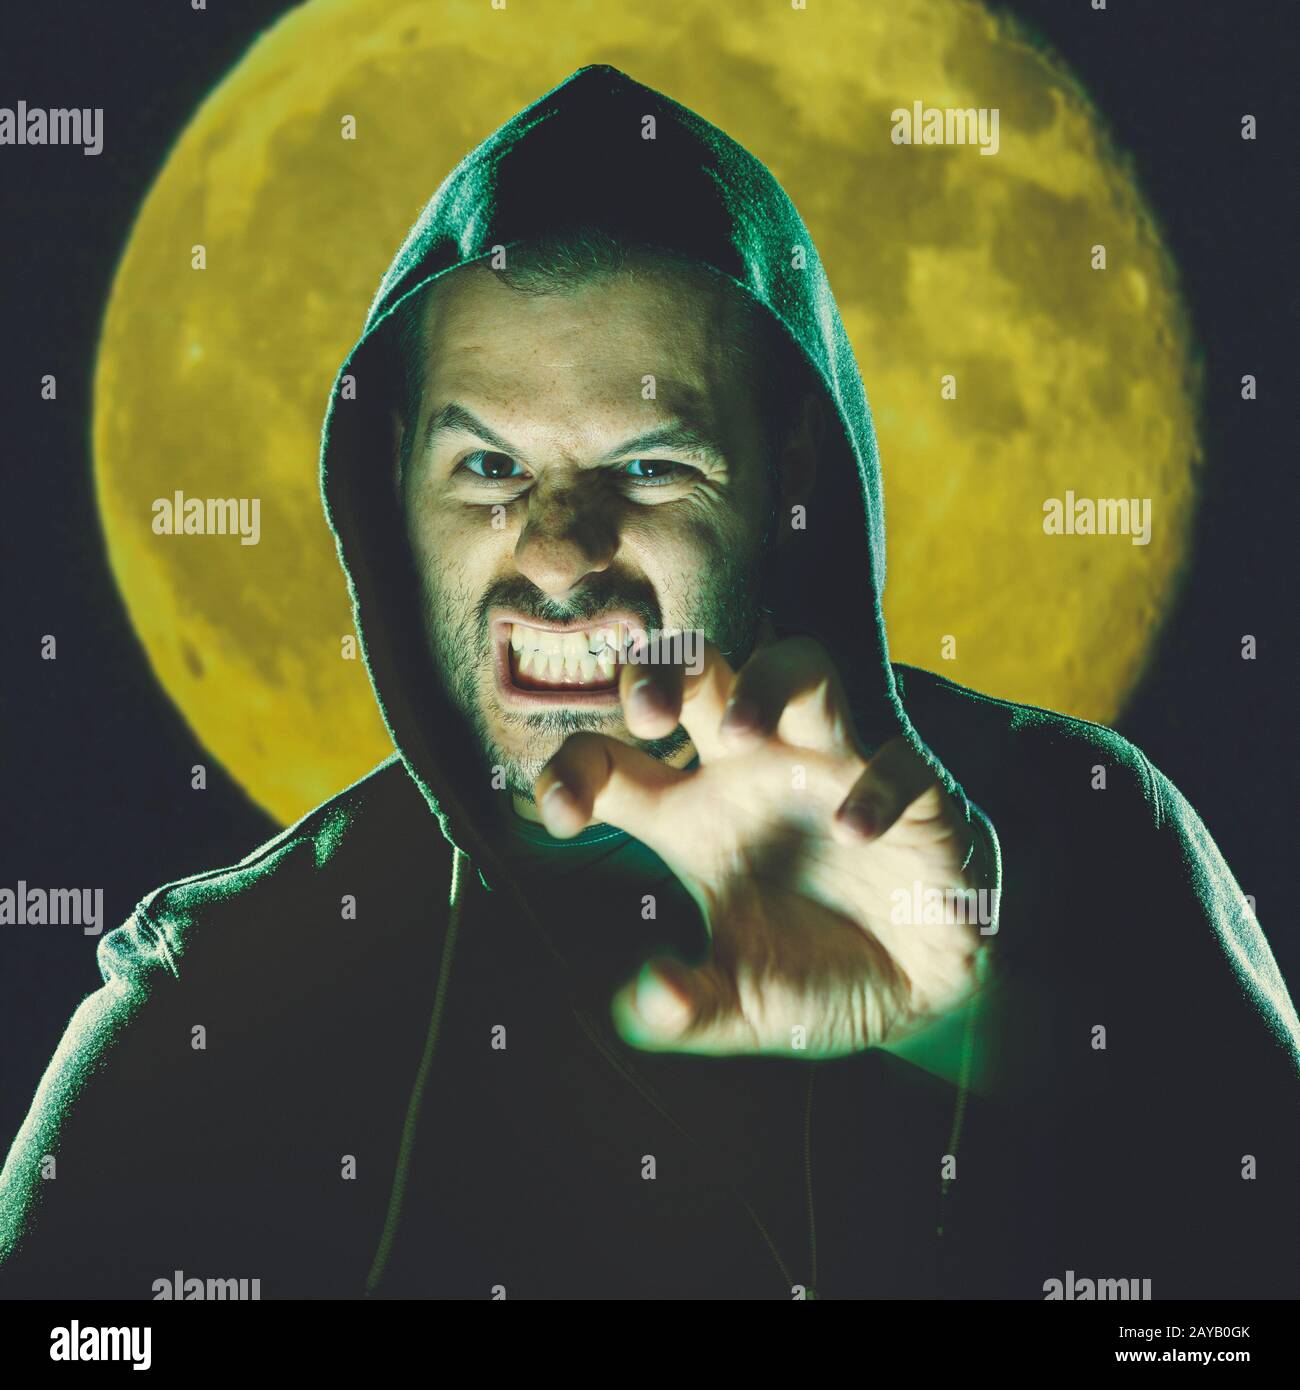 Scary man before full moon in a night scene. Stock Photo